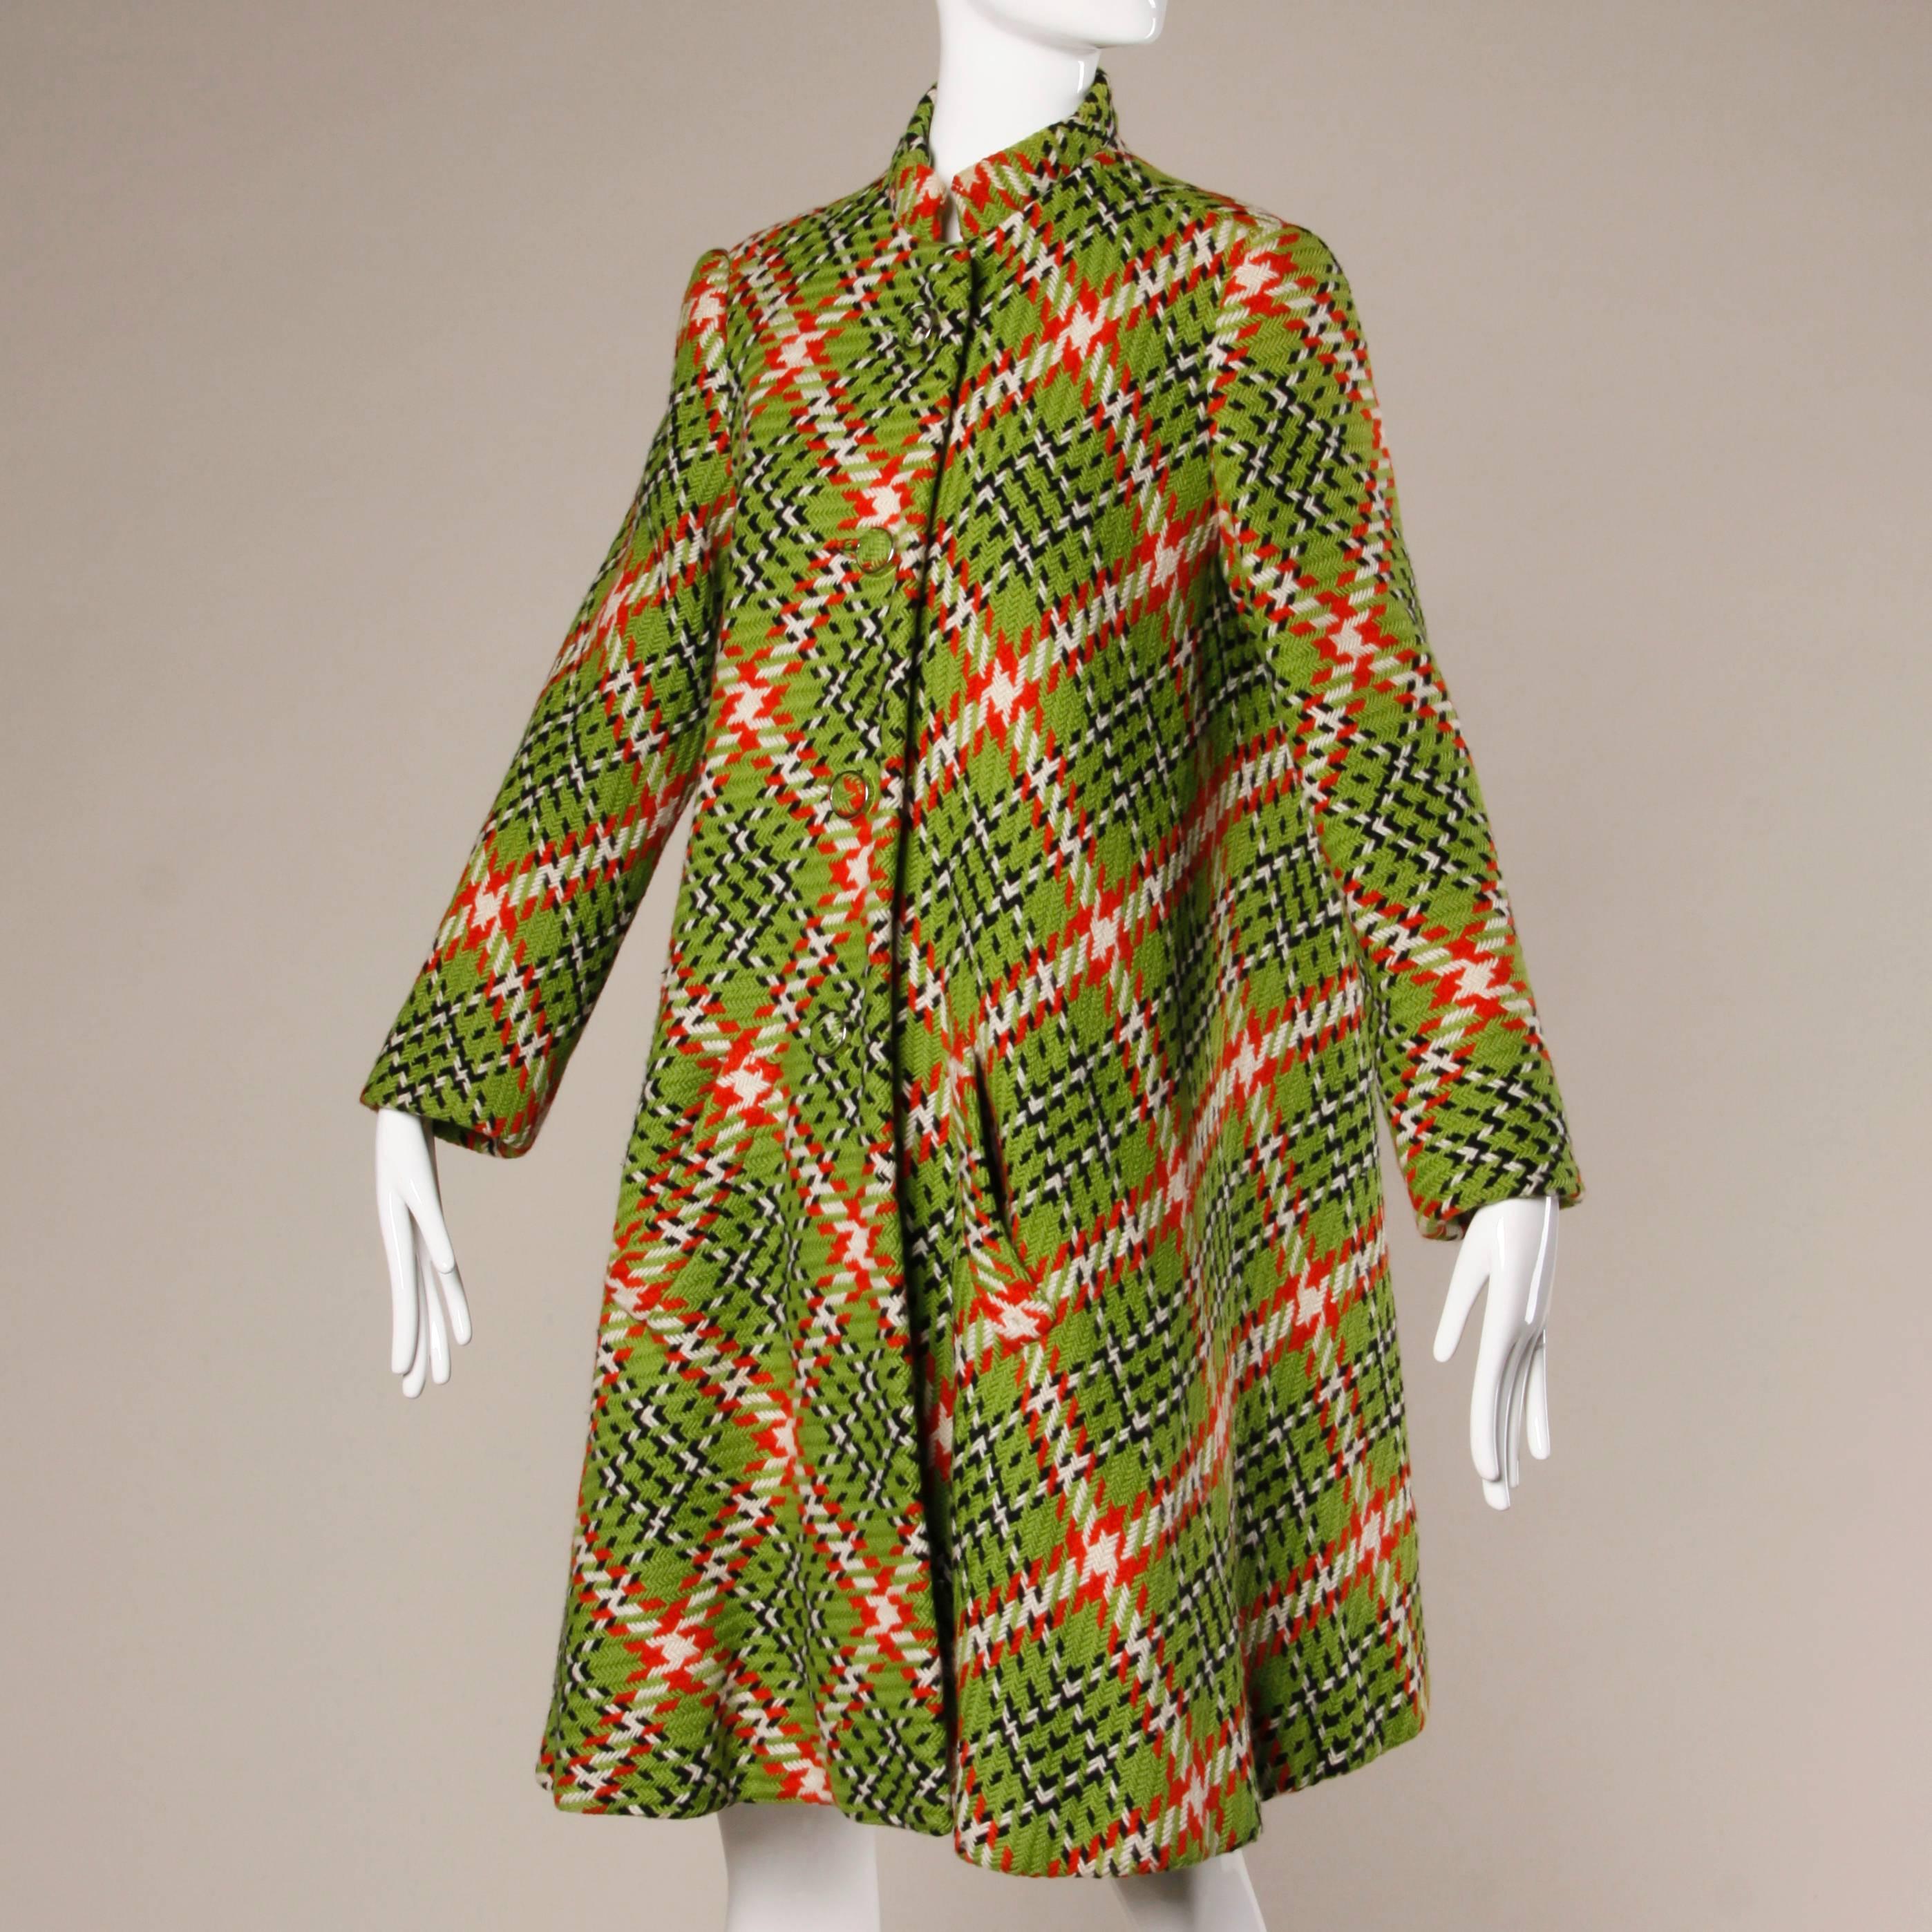 Amazing 1960s vibrant green and red woven plaid swing coat by Donald Brooks. Incredible hand stitched couture detailing and swing shape. Very thick, heavy and warm. A beautiful piece!

Details:

Fully Lined
Front Pockets
Front Button